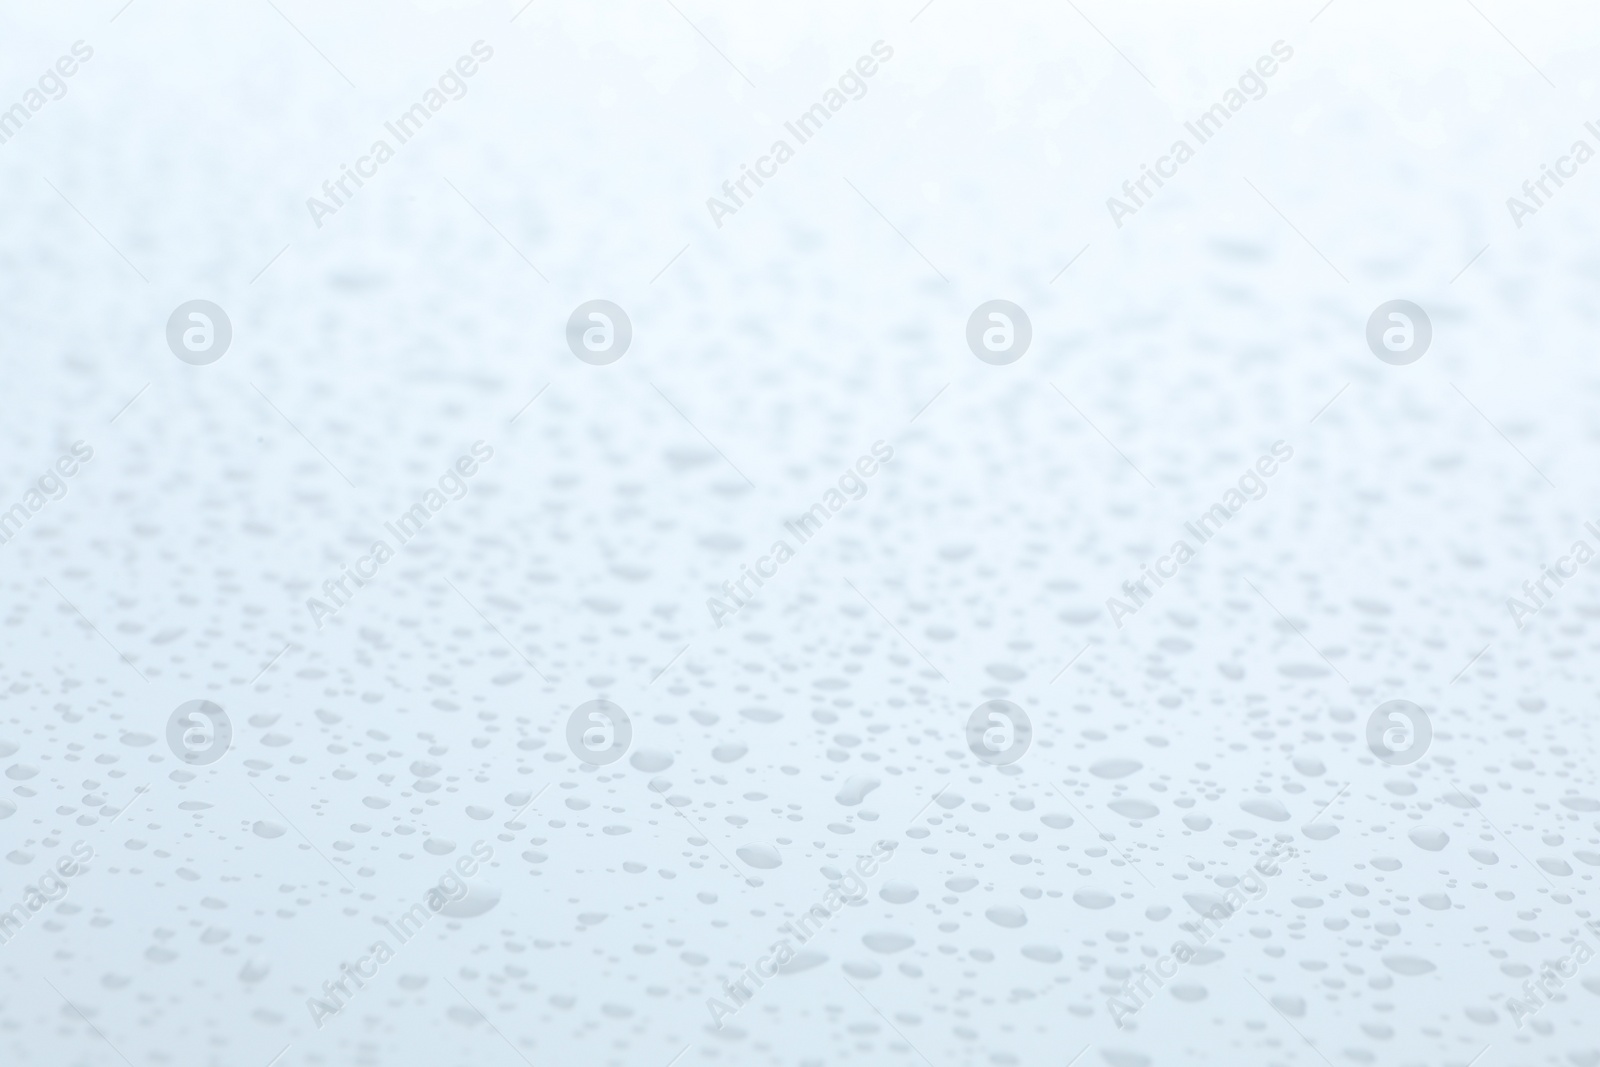 Photo of Water drops on white background, closeup view